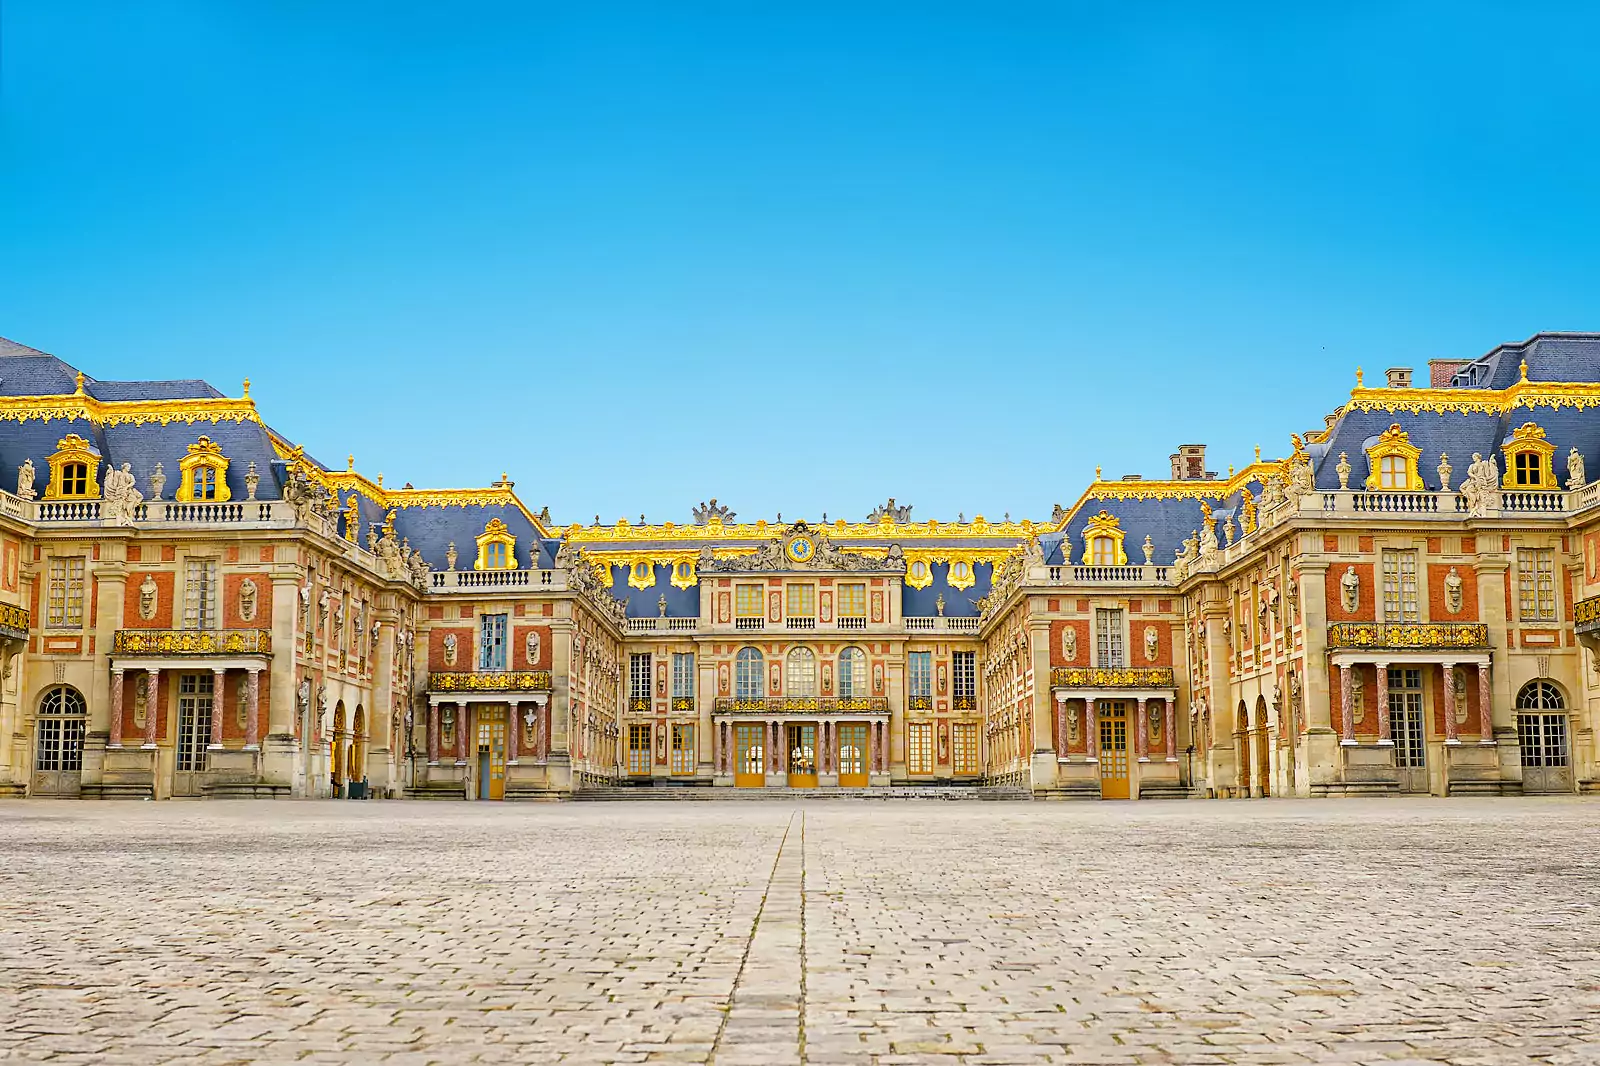 Palace of Versailles in france